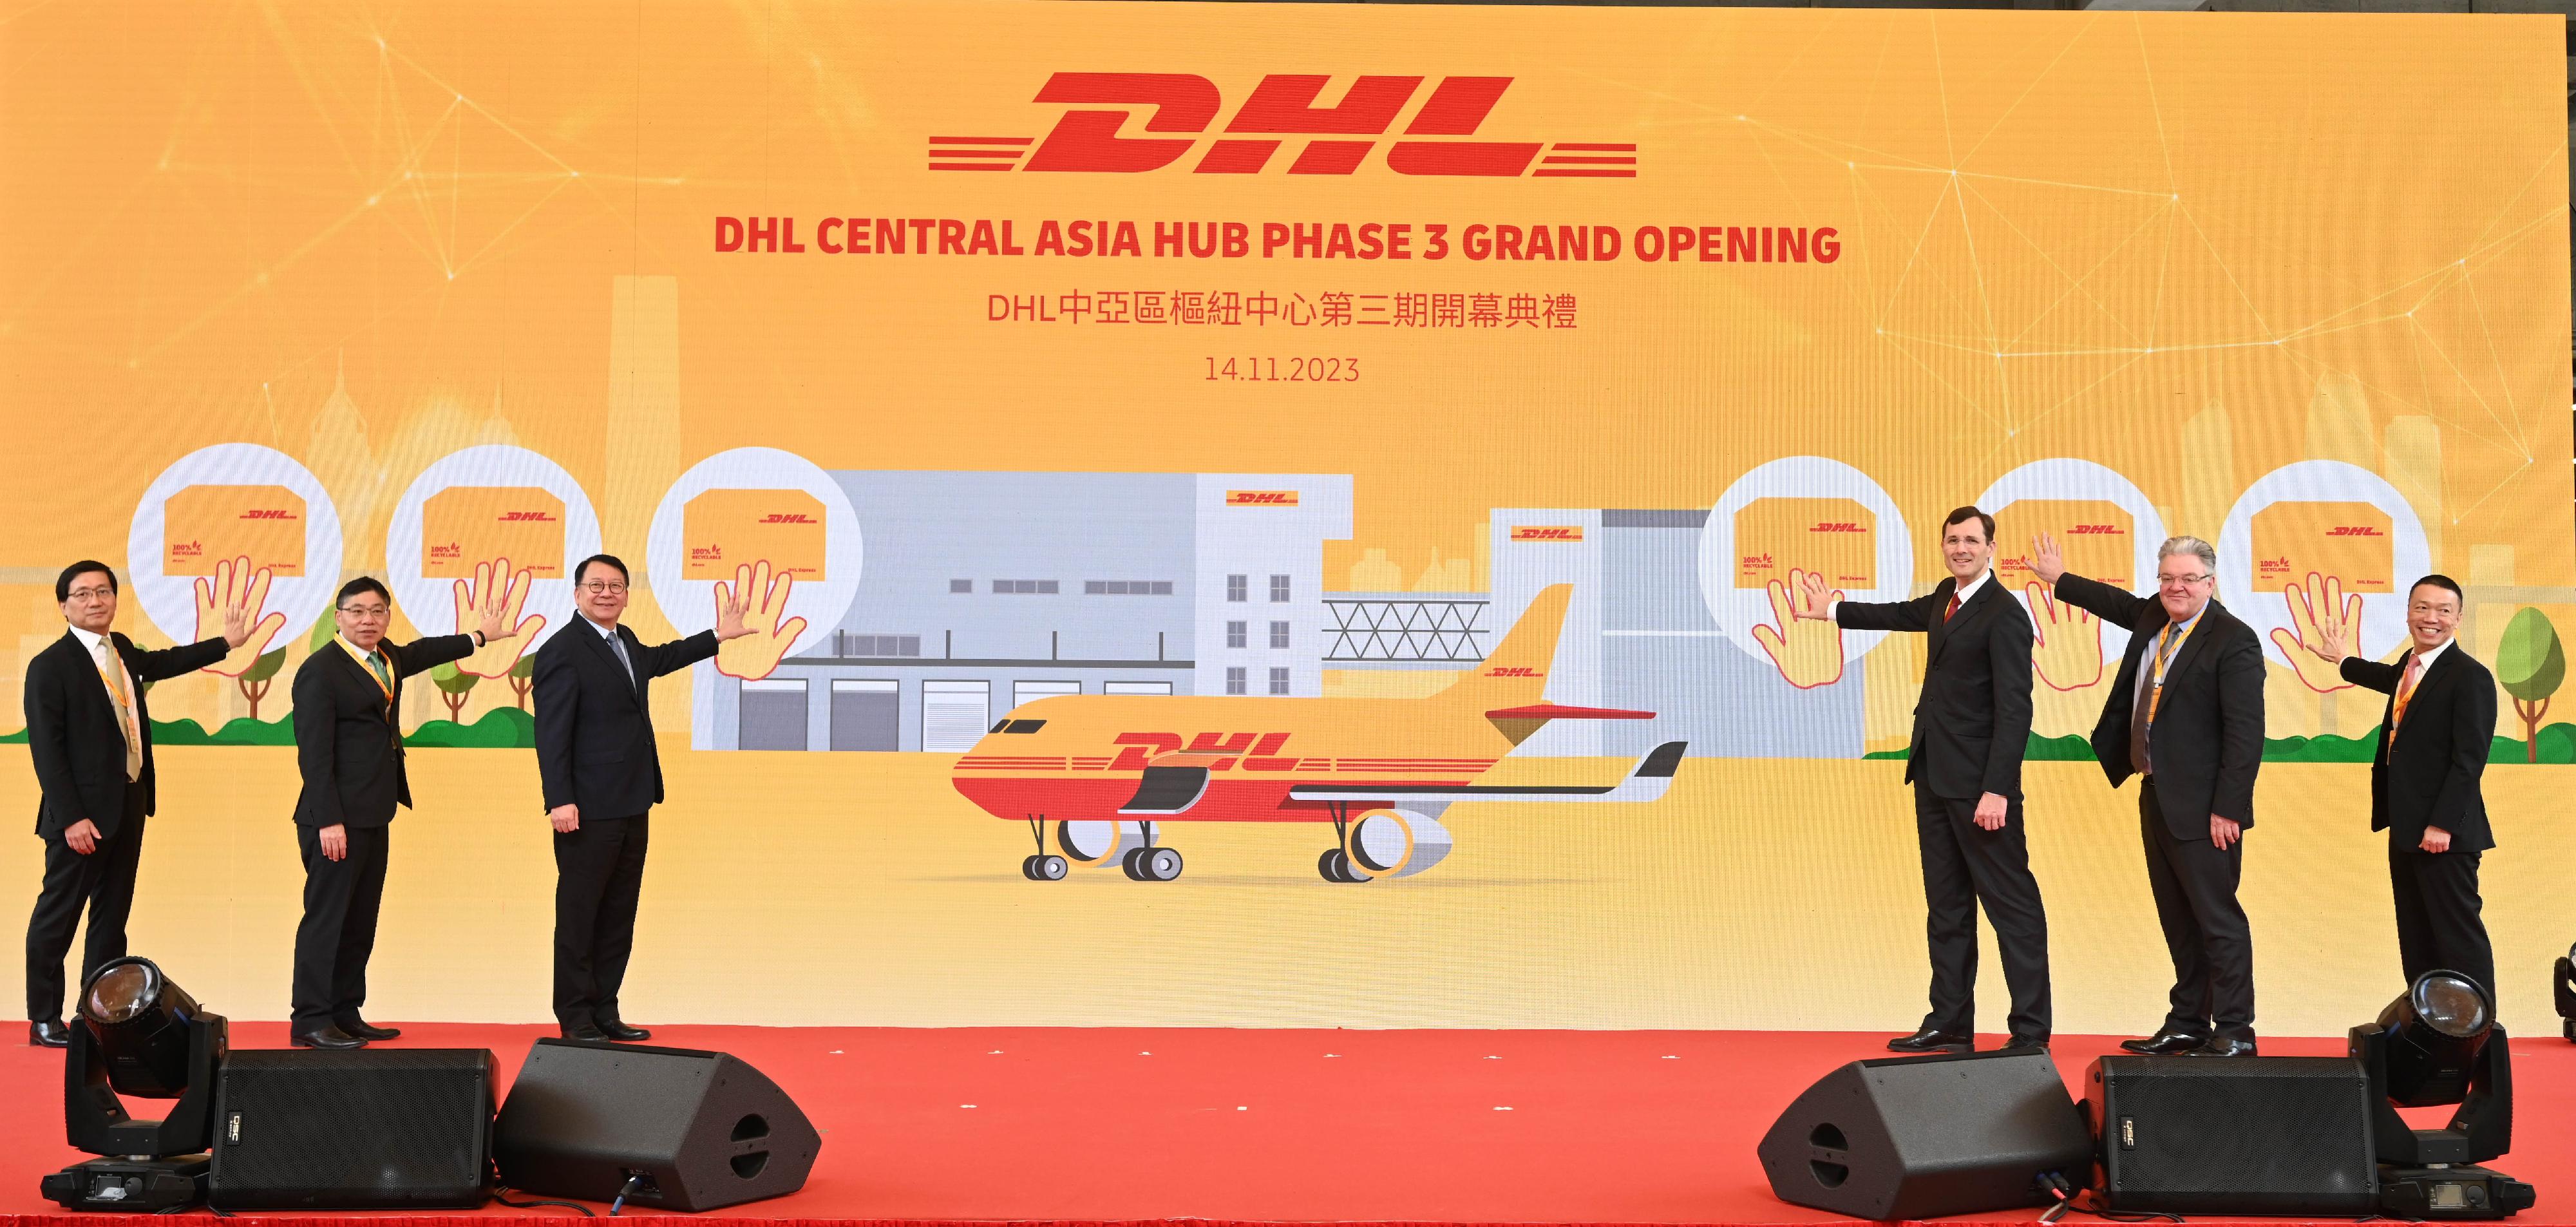 The Chief Secretary for Administration, Mr Chan Kwok-ki, attended the DHL Central Asia Hub Phase 3 Grand Opening today (November 14). Photo shows (from left) the Chief Executive Officer of the Airport Authority Hong Kong, Mr Fred Lam; the Secretary for Transport and Logistics, Mr Lam Sai-hung; Mr Chan; the Chief Executive Officer of the DHL Group, Dr Tobias Meyer; the Chief Executive Officer of the DHL Express, Mr John Pearson; and the Chief Executive Officer of the DHL Express Asia Pacific, Mr Ken Lee, officiating at the grand opening.